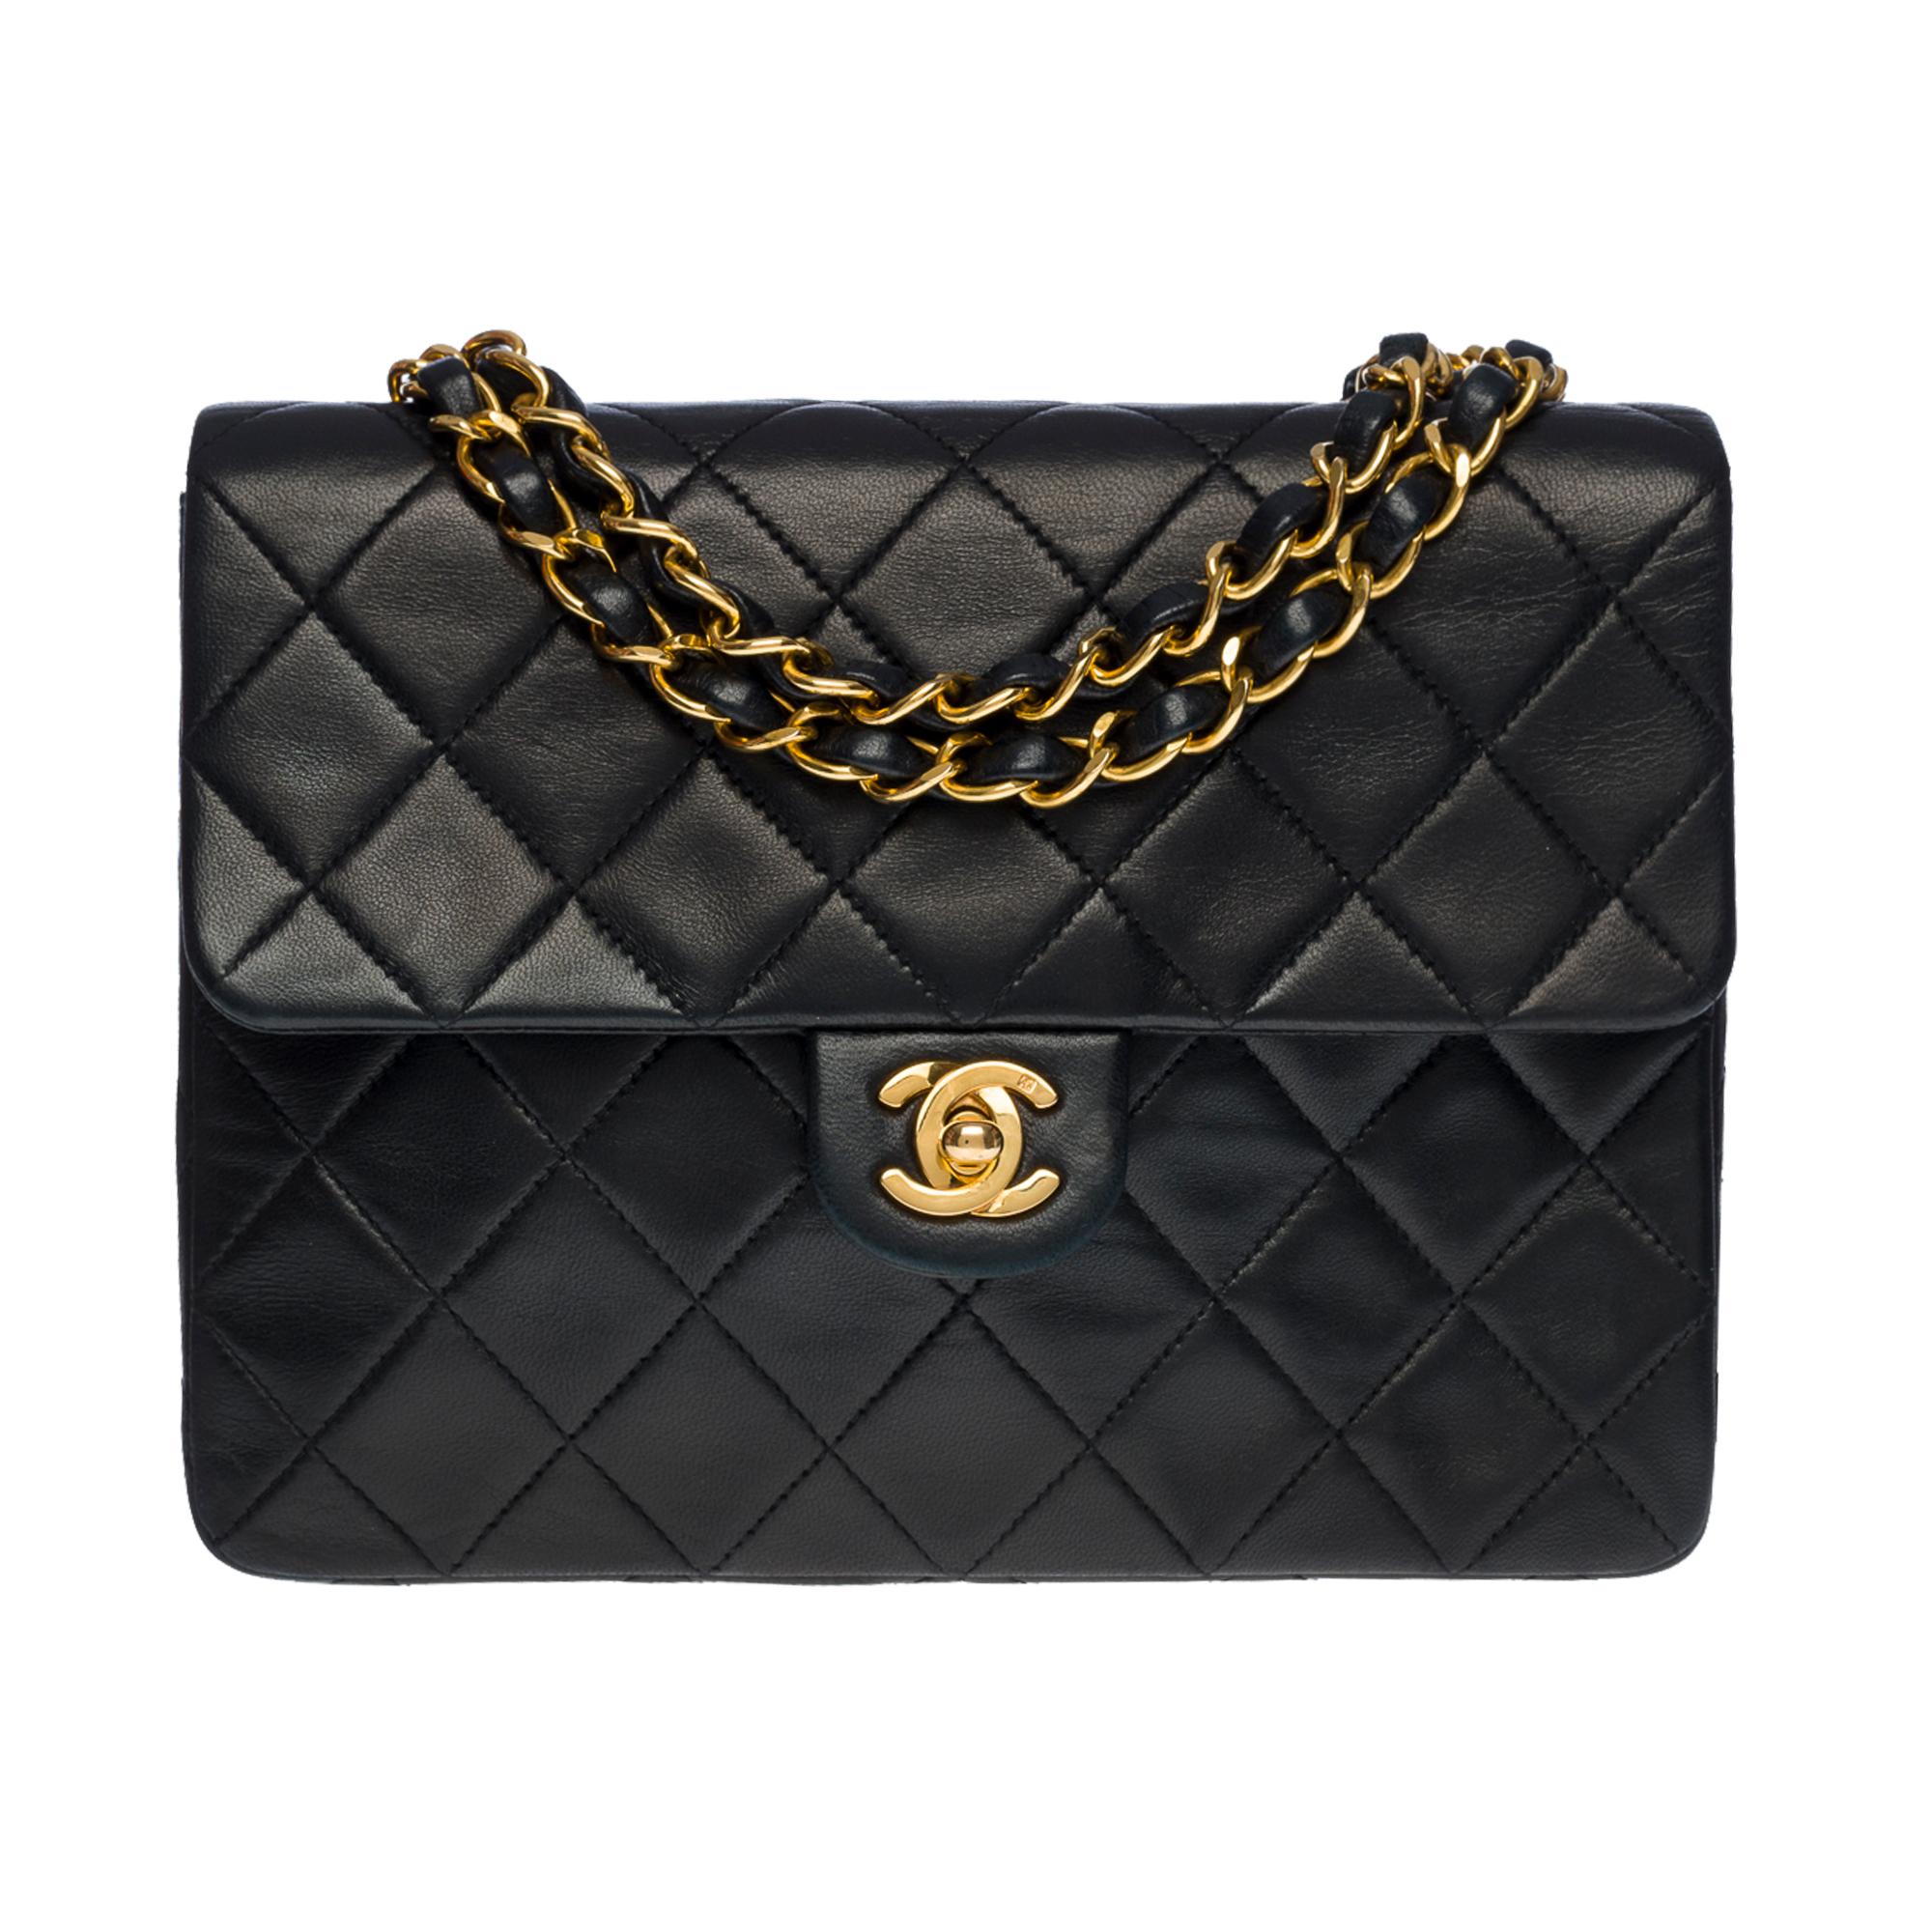 Exquisite Chanel Mini Timeless Square flap shoulder bag in black quilted lambskin, shoulder strap in gold metal interlaced with black lambskin
Flap closure and gold metal turnstile closure
Burgundy lambskin interior, 1 double patch pocket, 1